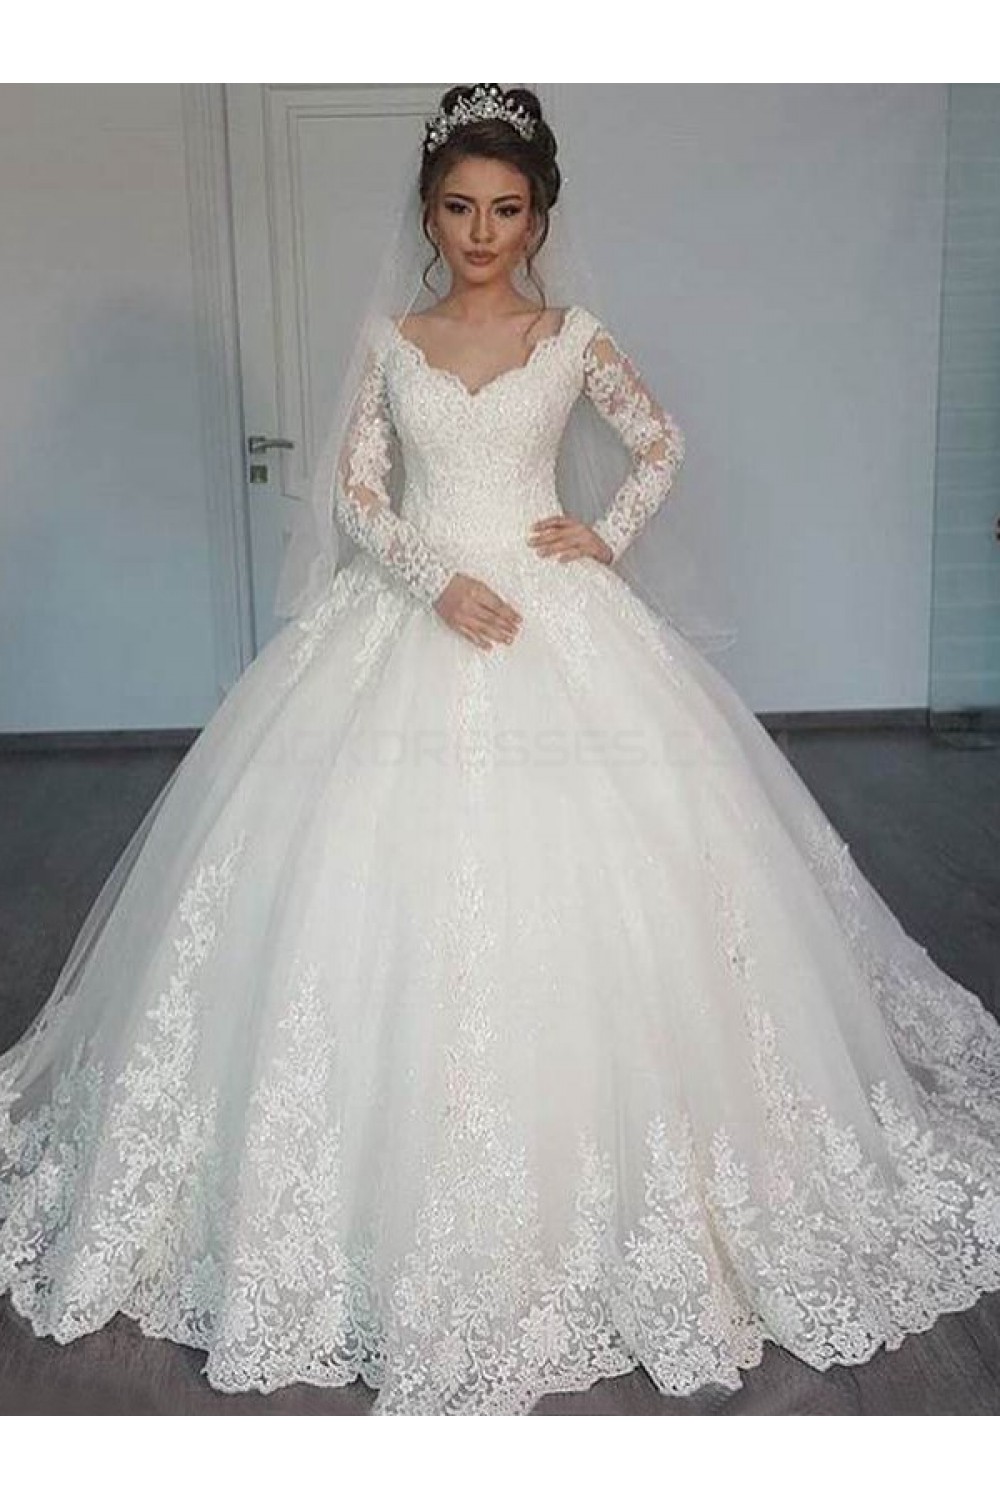 Bridal Ball Gown V Neck Lace Long Sleeves Wedding Dresses Bridal Gowns 3030126 7671